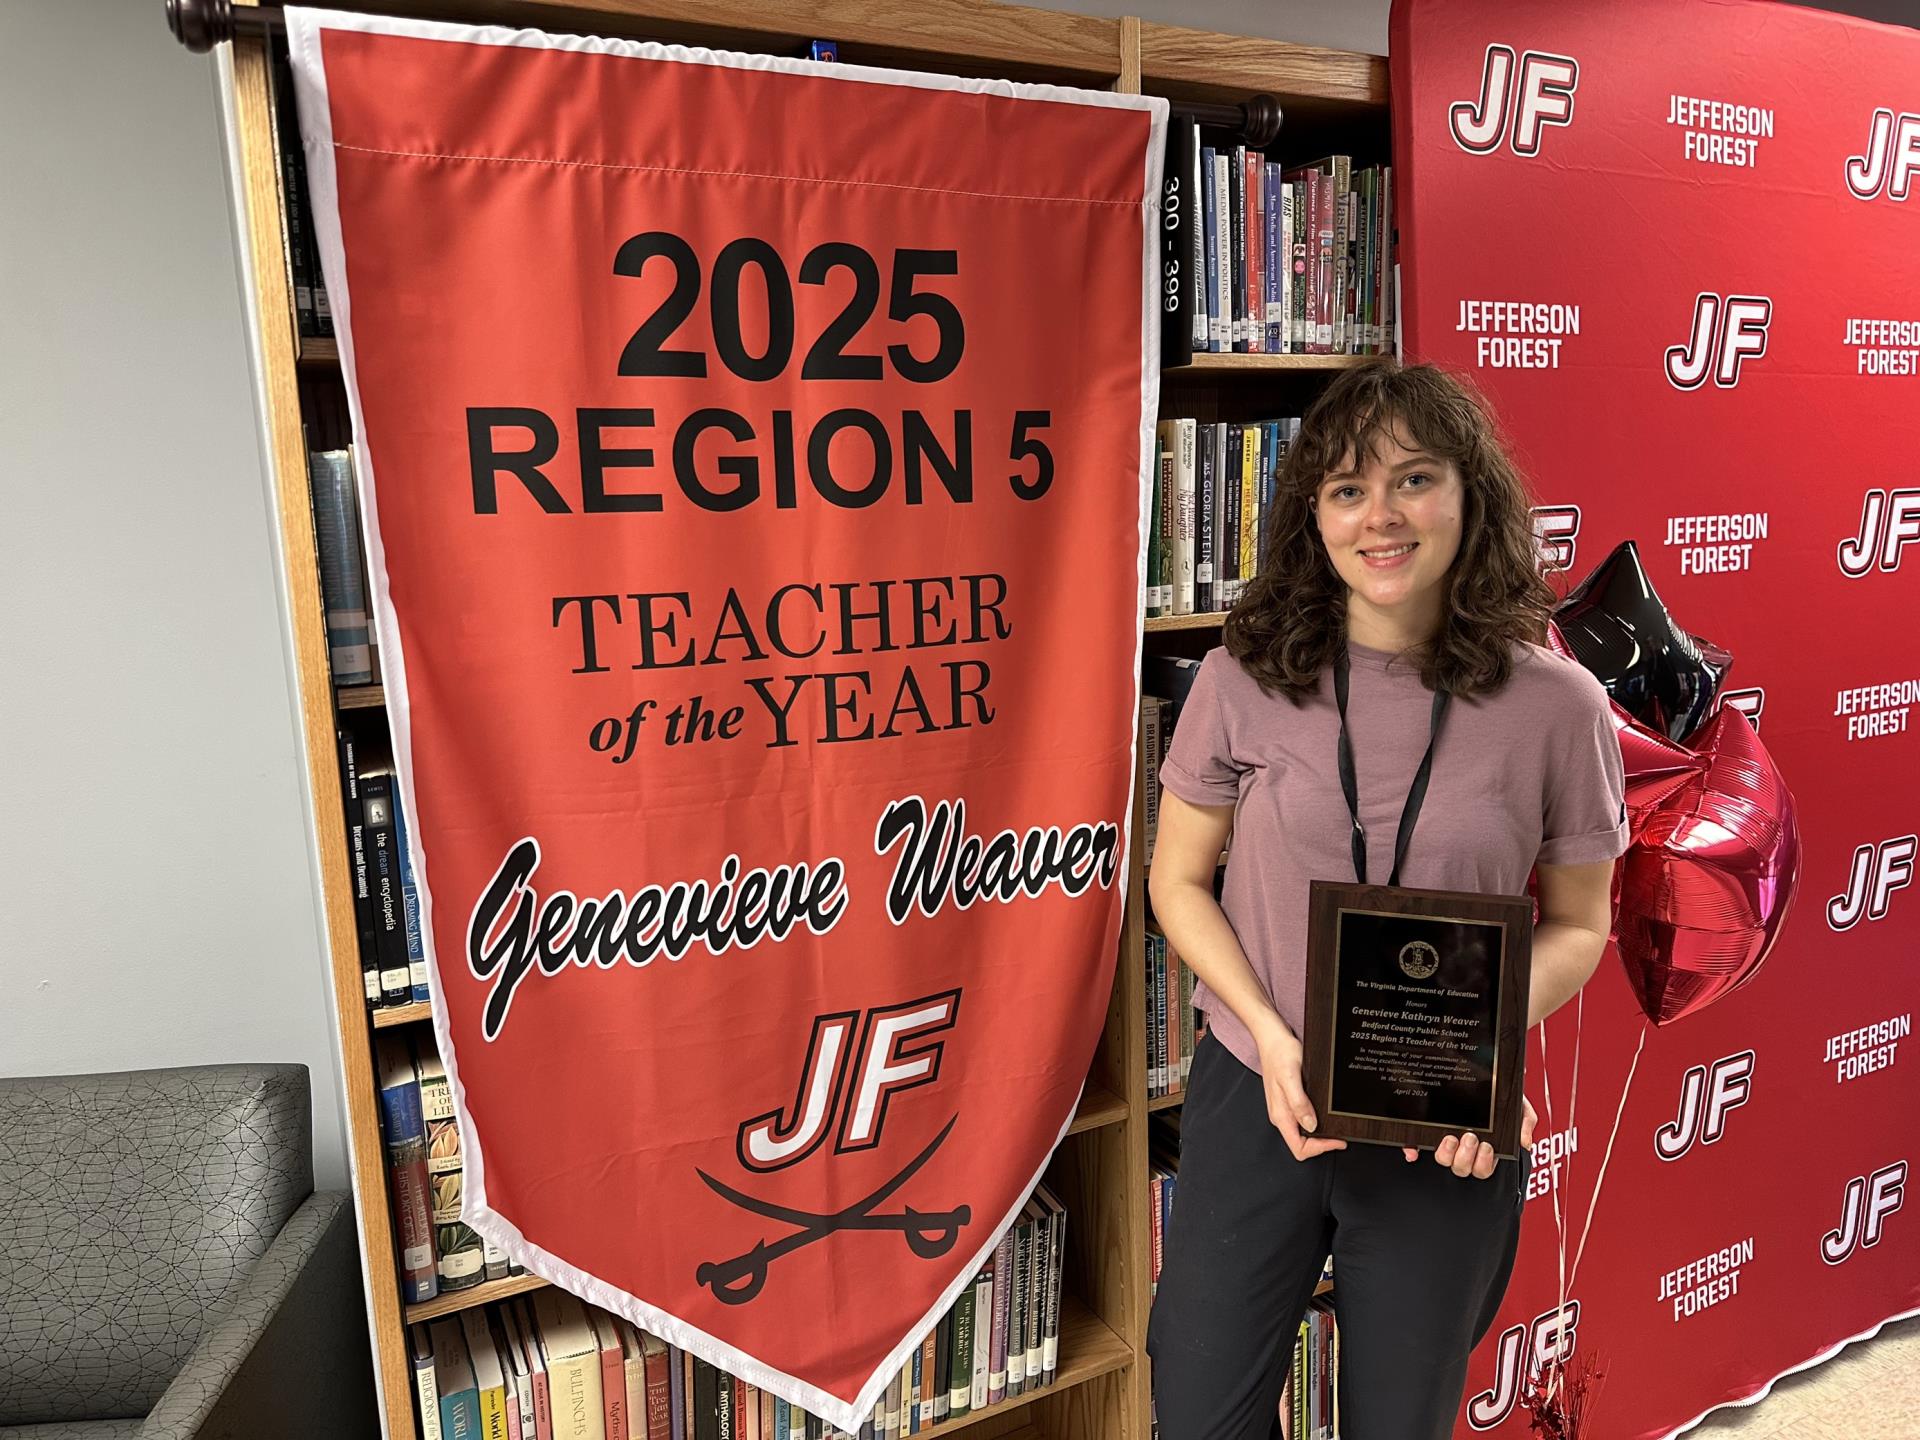 Genevieve Weaver smiling next to a 2025 Region 5 Teacher of the Year Banner